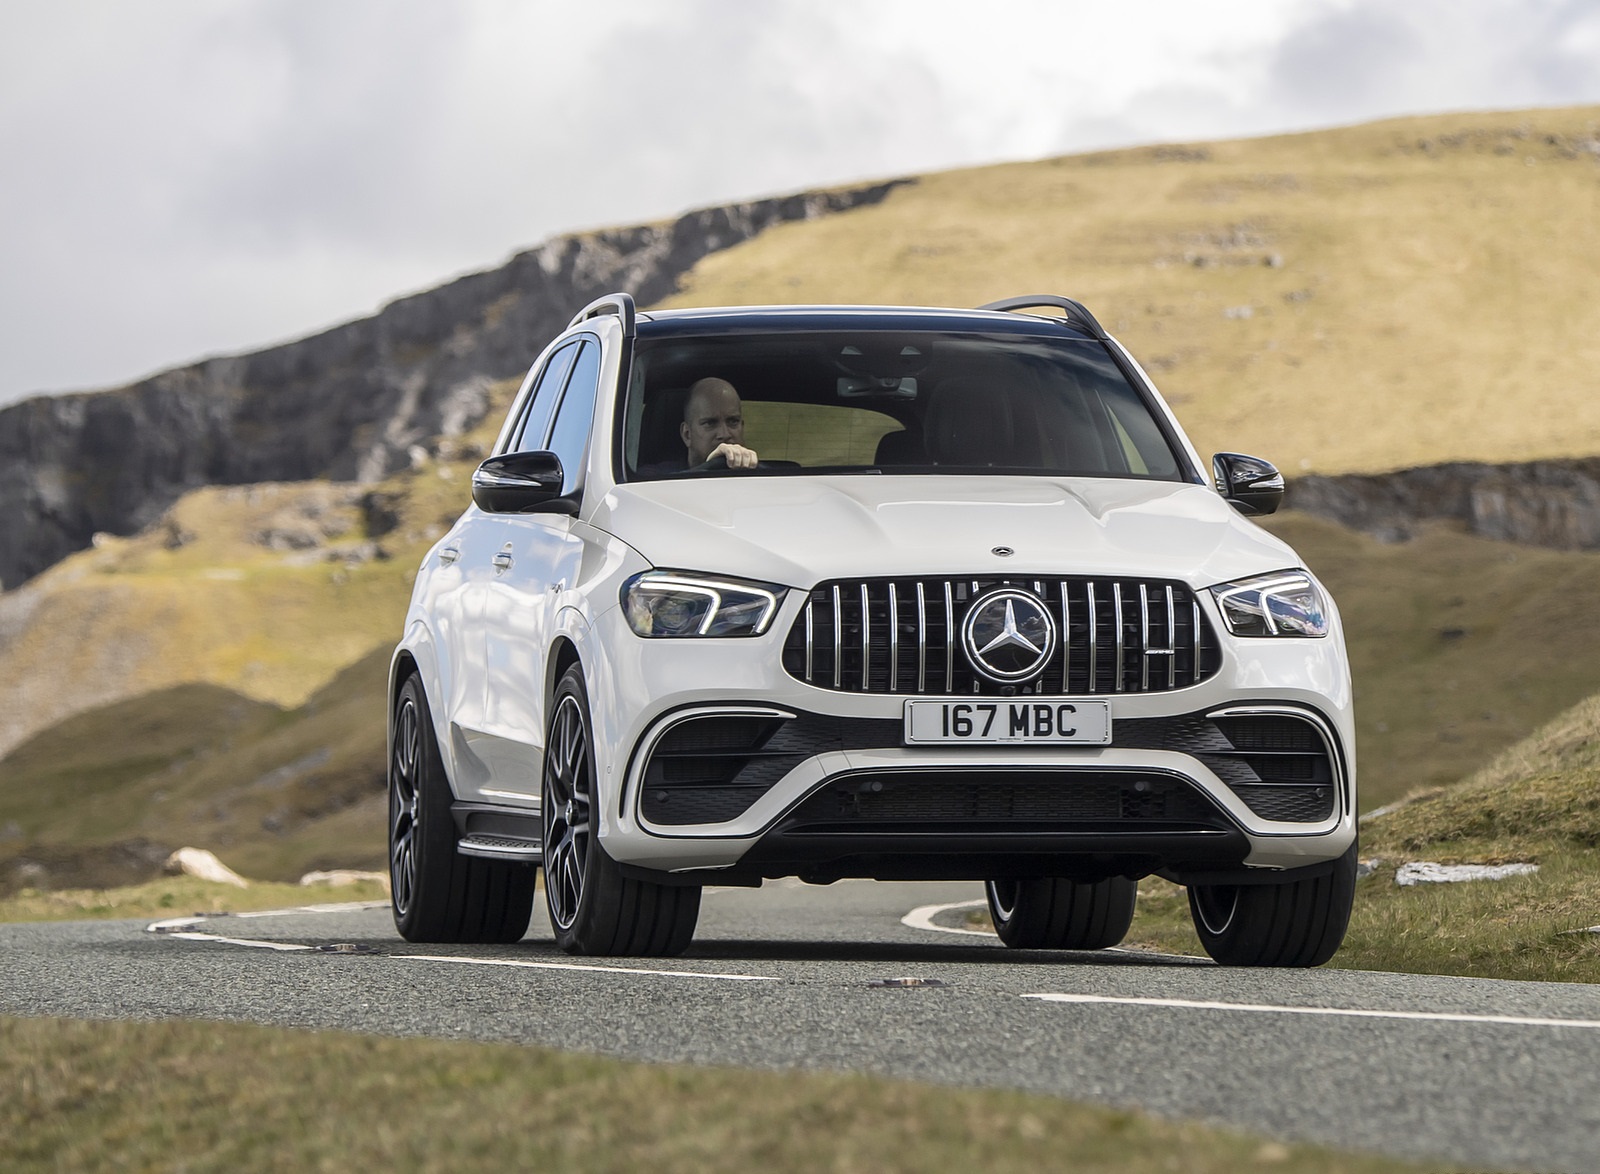 2021 Mercedes-AMG GLE 63 S 4MATIC (UK-Spec) Front Wallpapers (2)